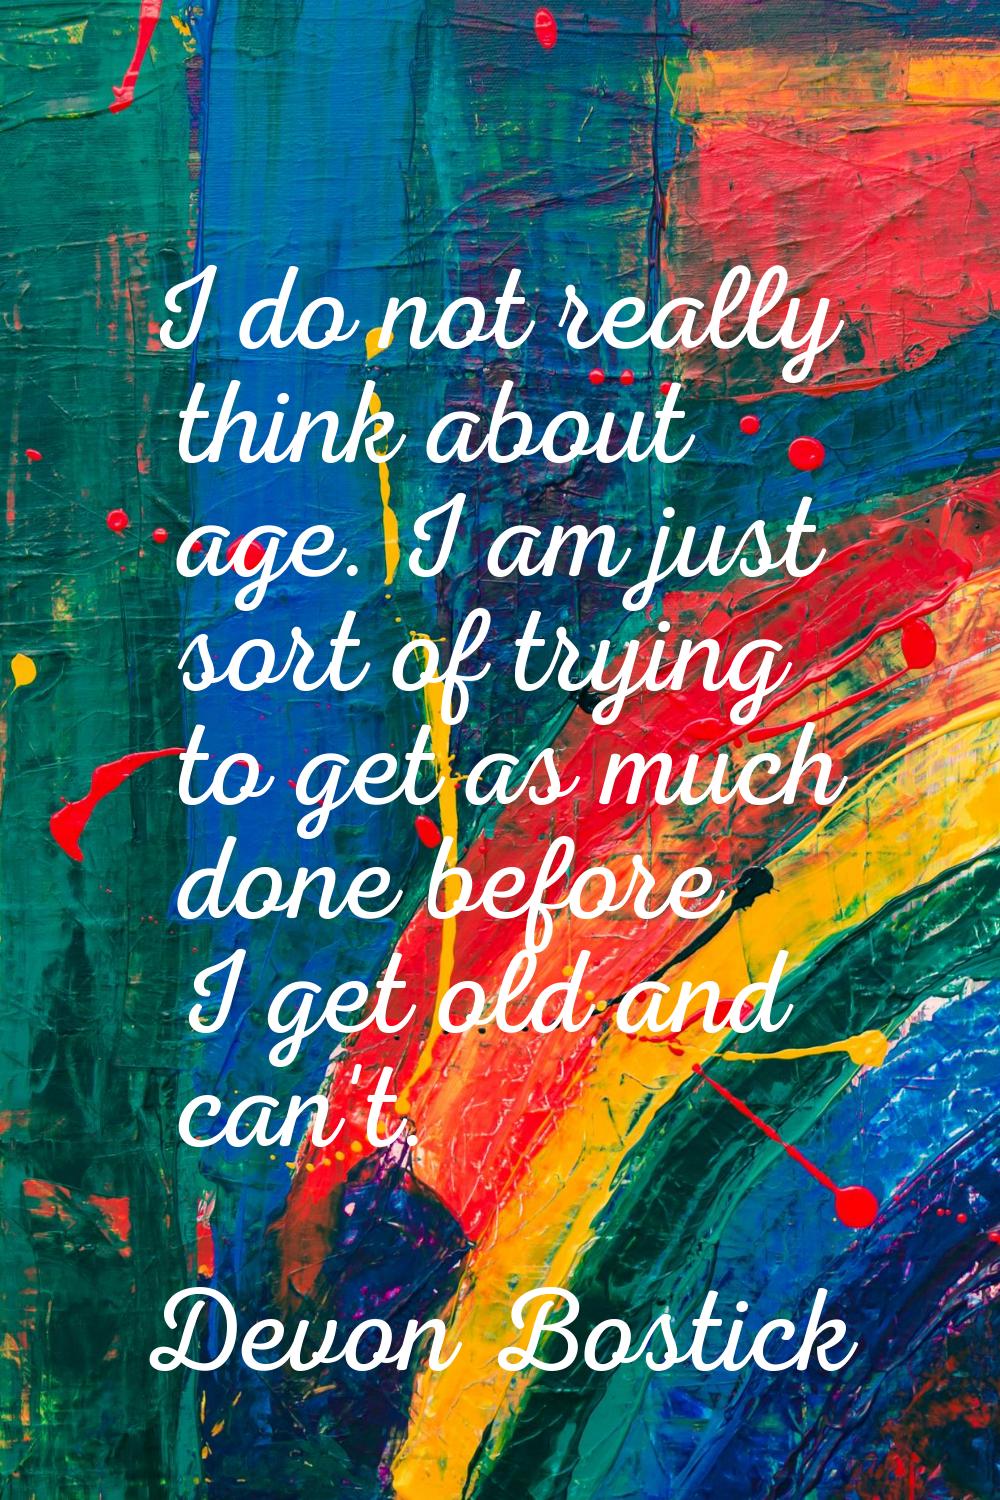 I do not really think about age. I am just sort of trying to get as much done before I get old and 